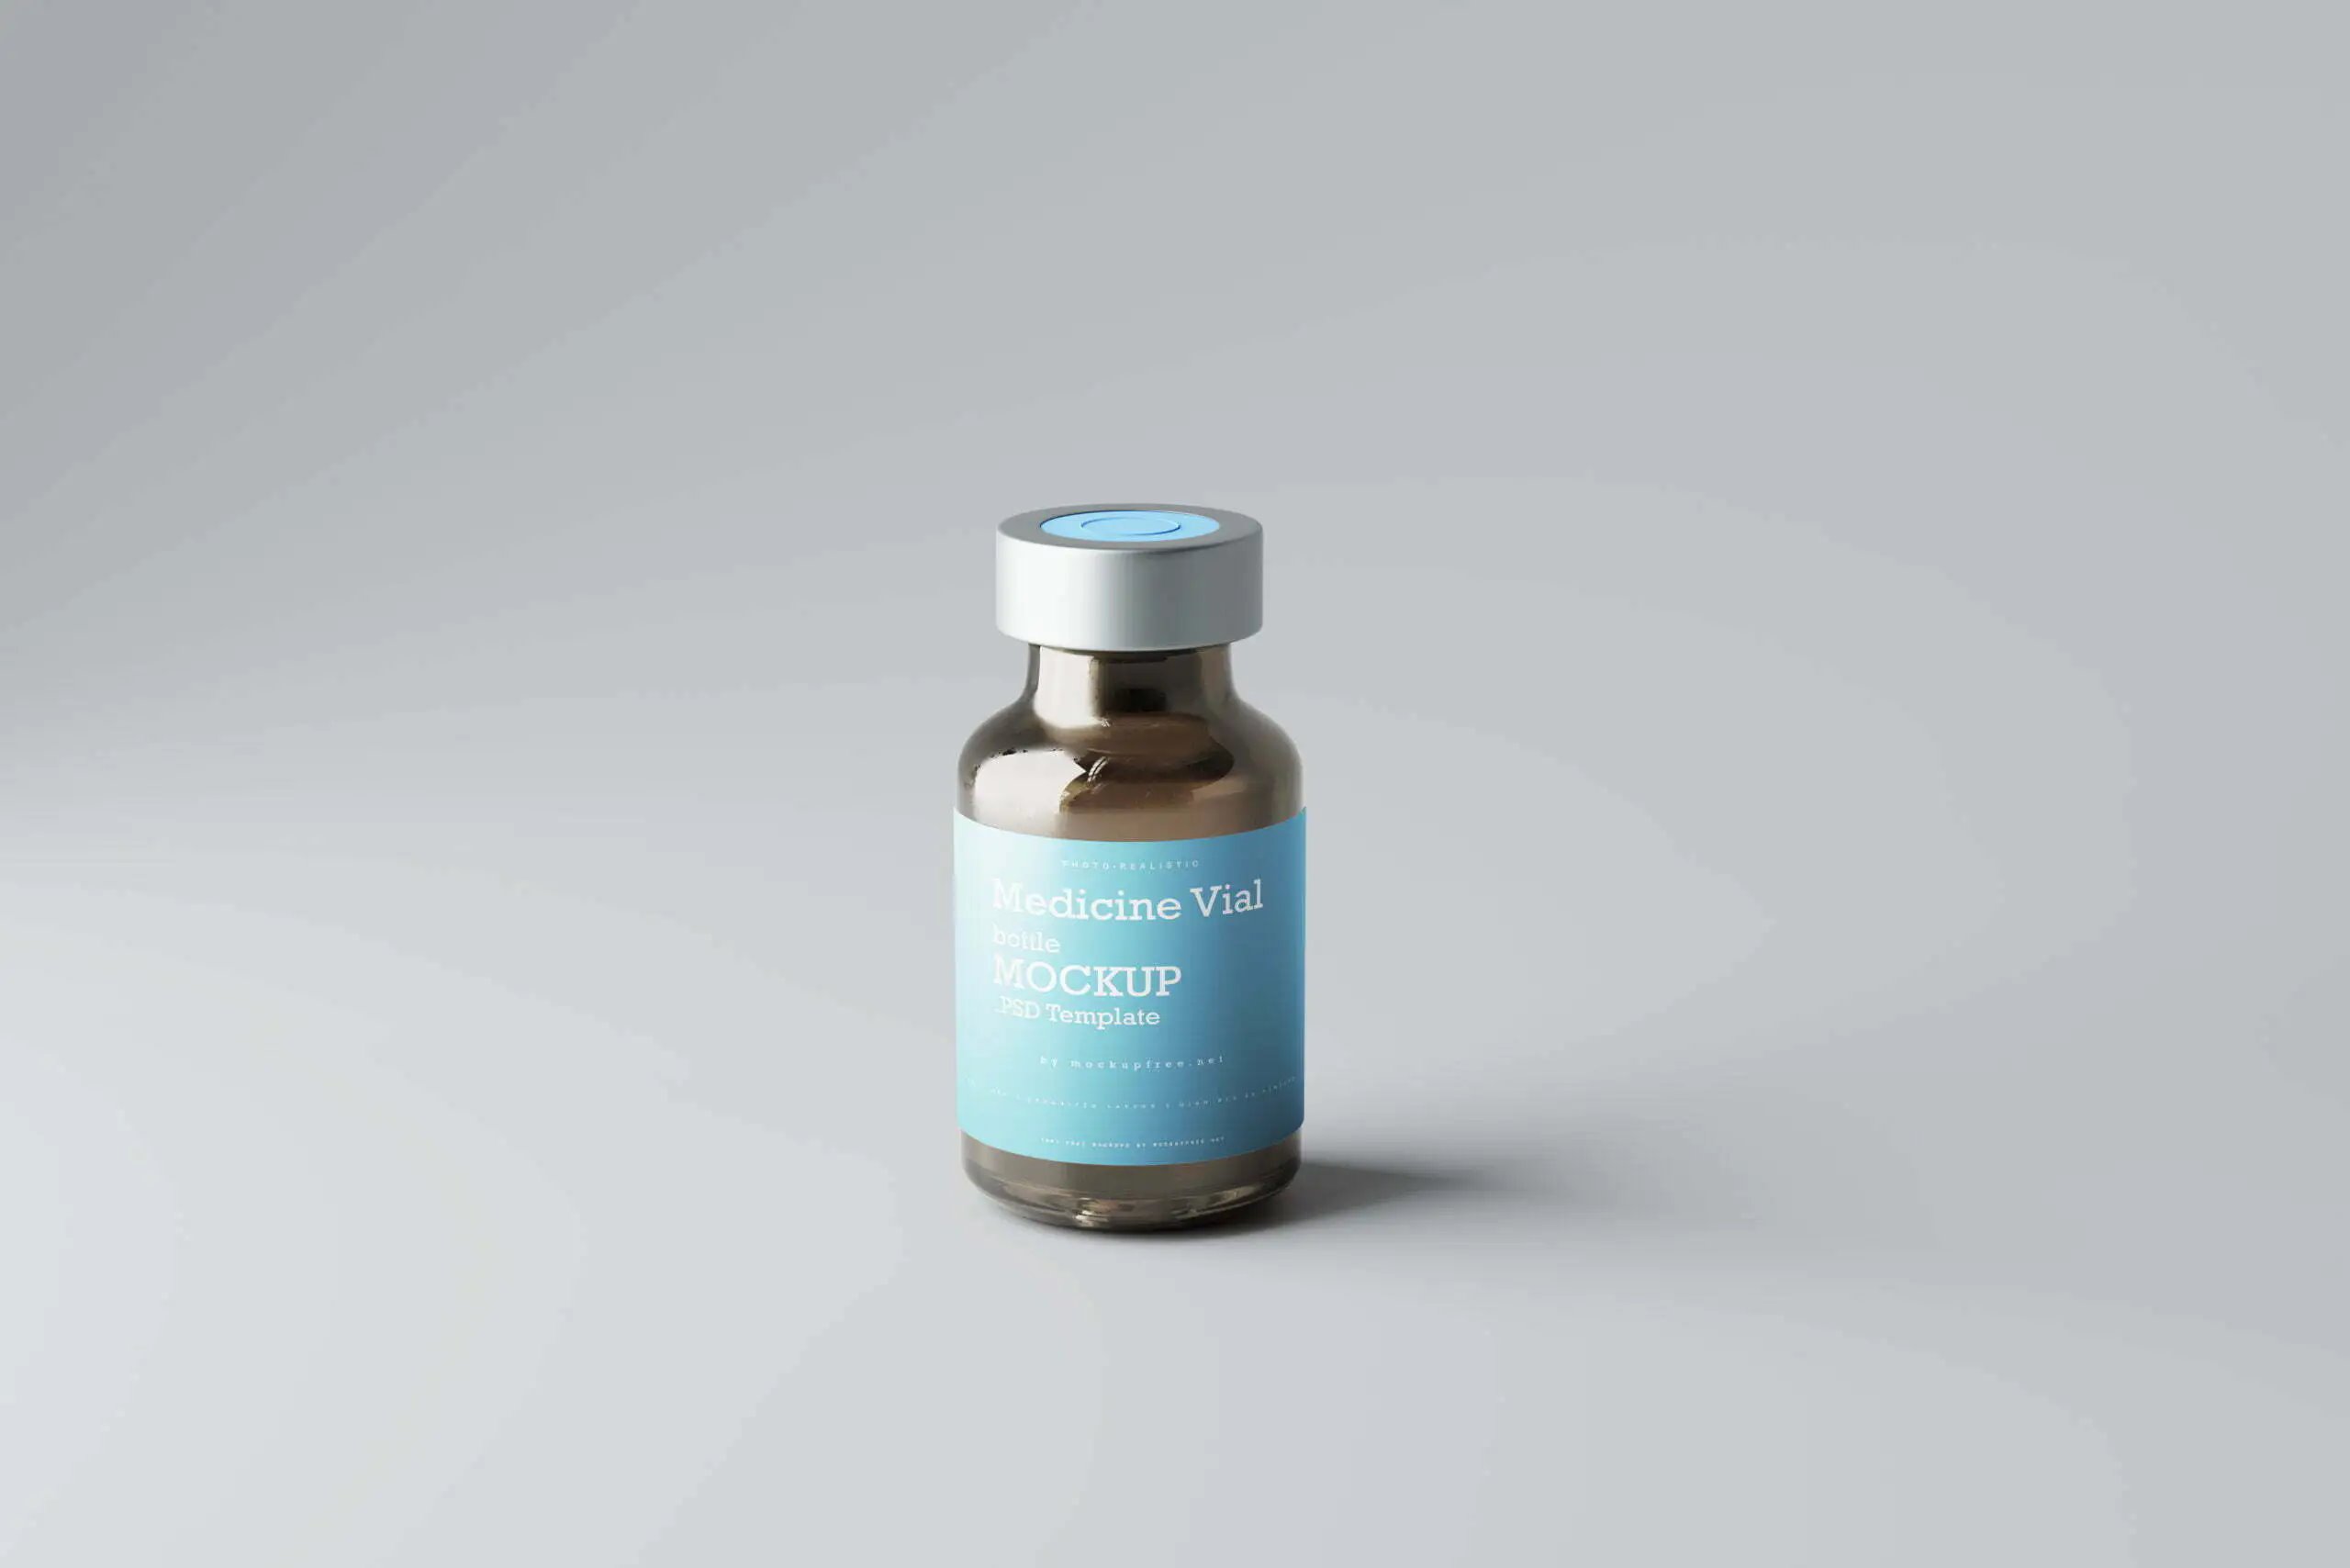 3 Vaccine Vial Bottle Mockups in Different Sights FREE PSD